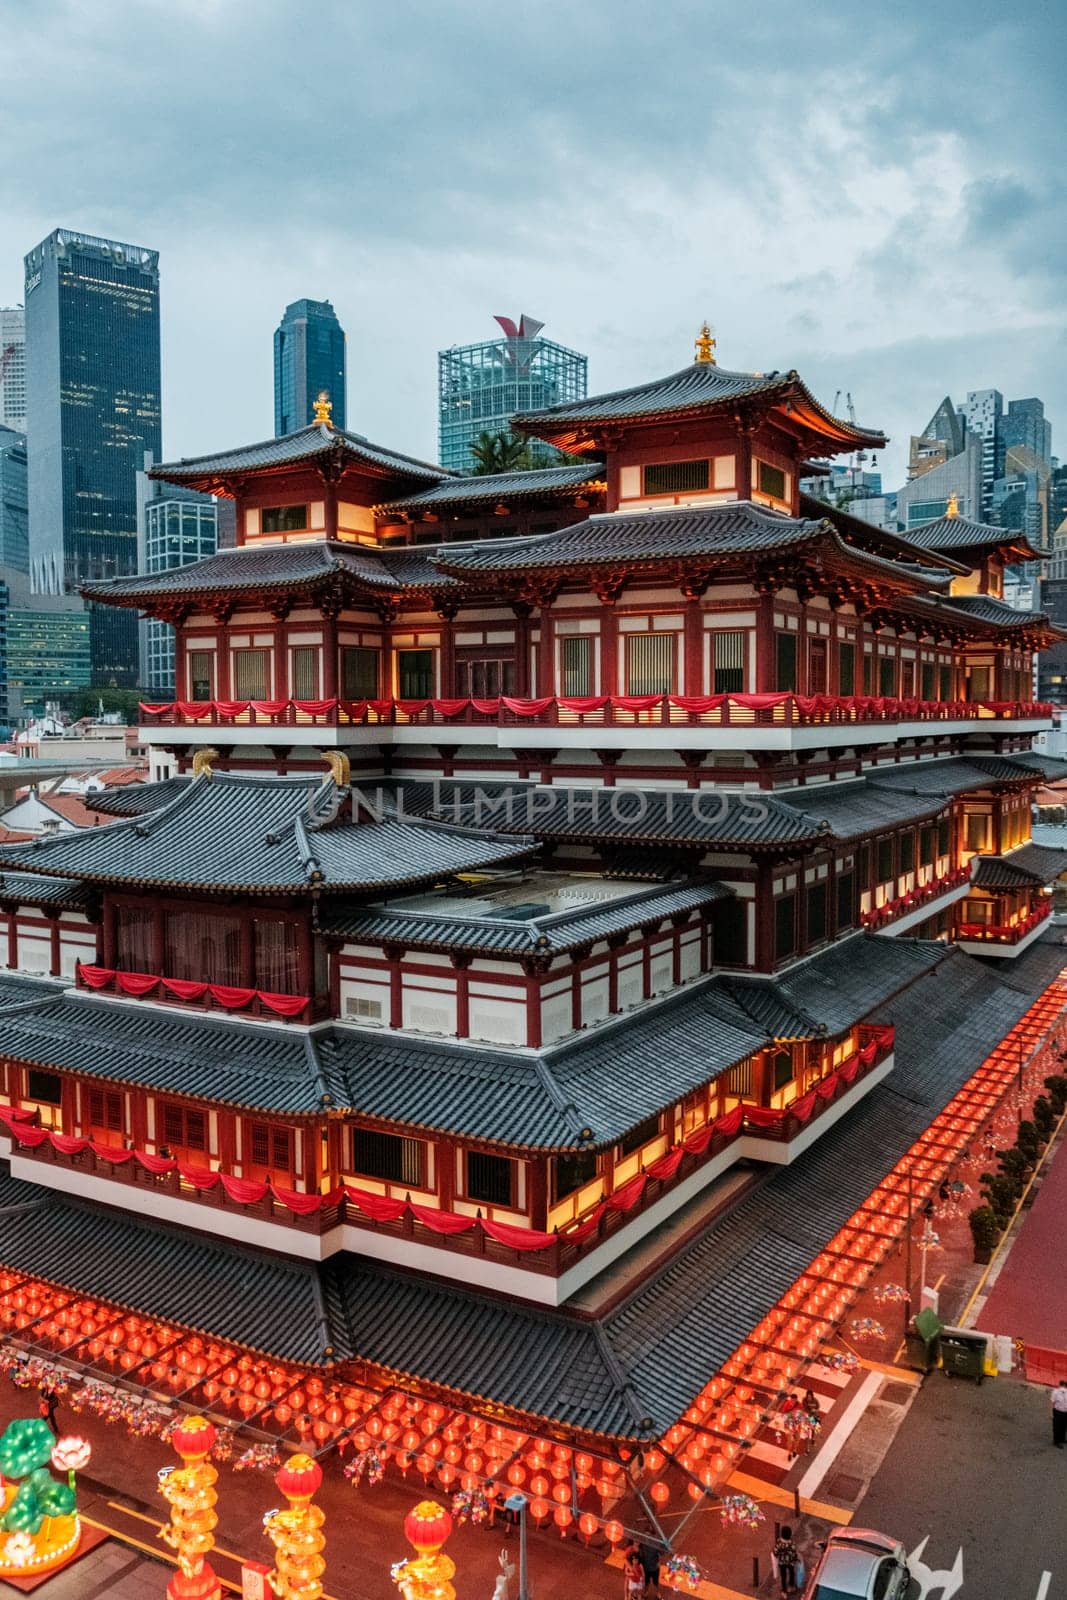 Buddha Tooth Relic Temple and Museum in the Chinatown district of Singapore Portrait